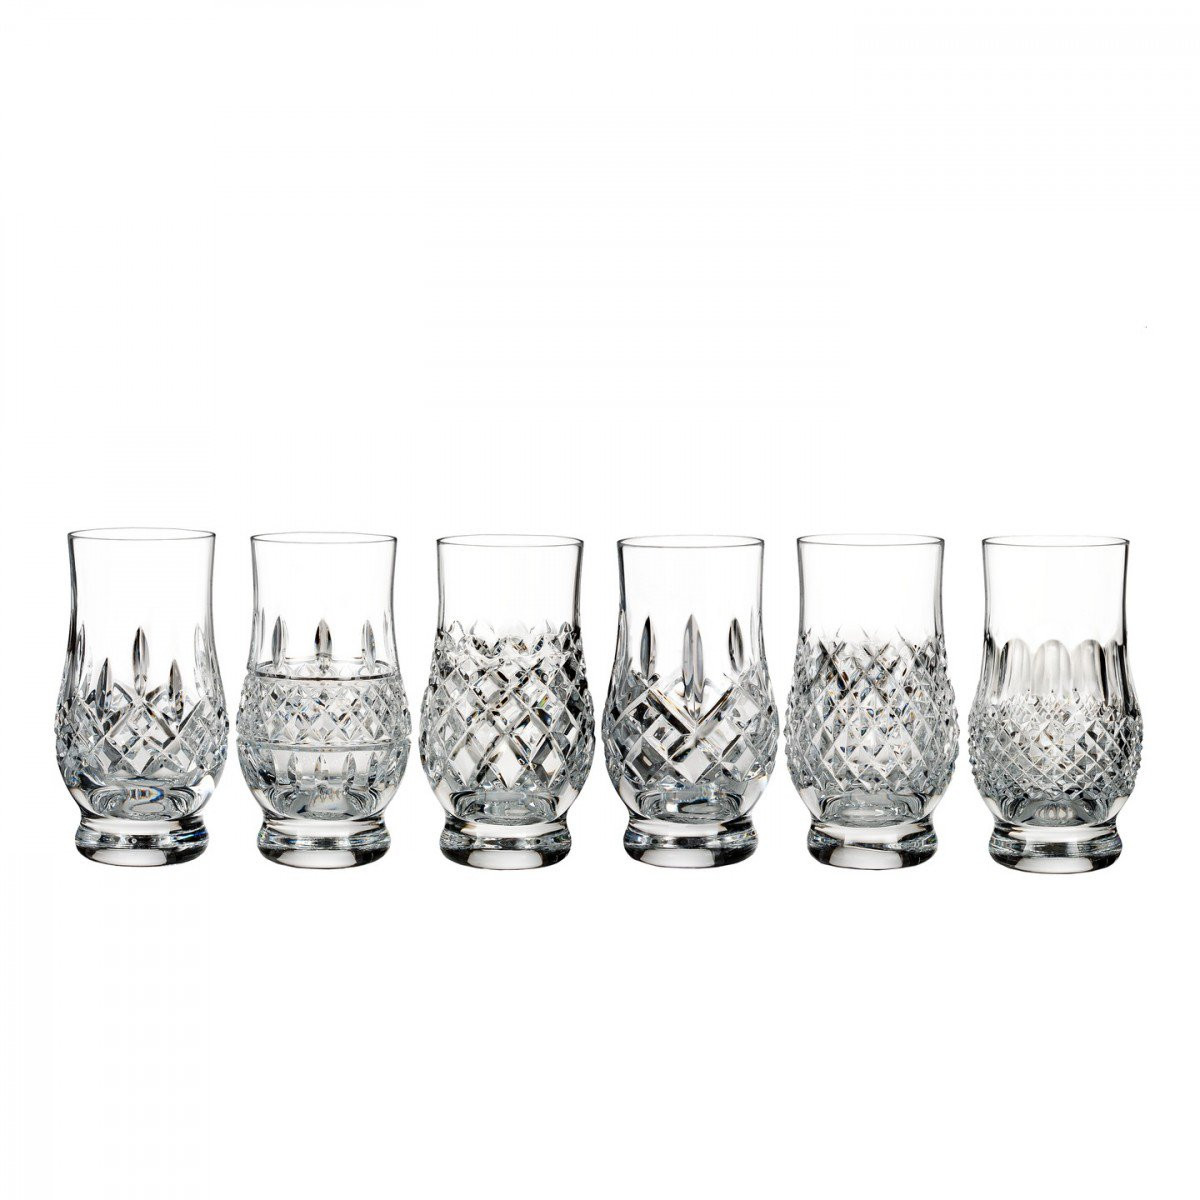 22 Stylish Waterford Maritana Vase 2024 free download waterford maritana vase of lismore connoisseur heritage 5 7oz footed tasting tumbler set of 6 with lismore connoisseur heritage 5 7oz footed tasting tumbler set of 6